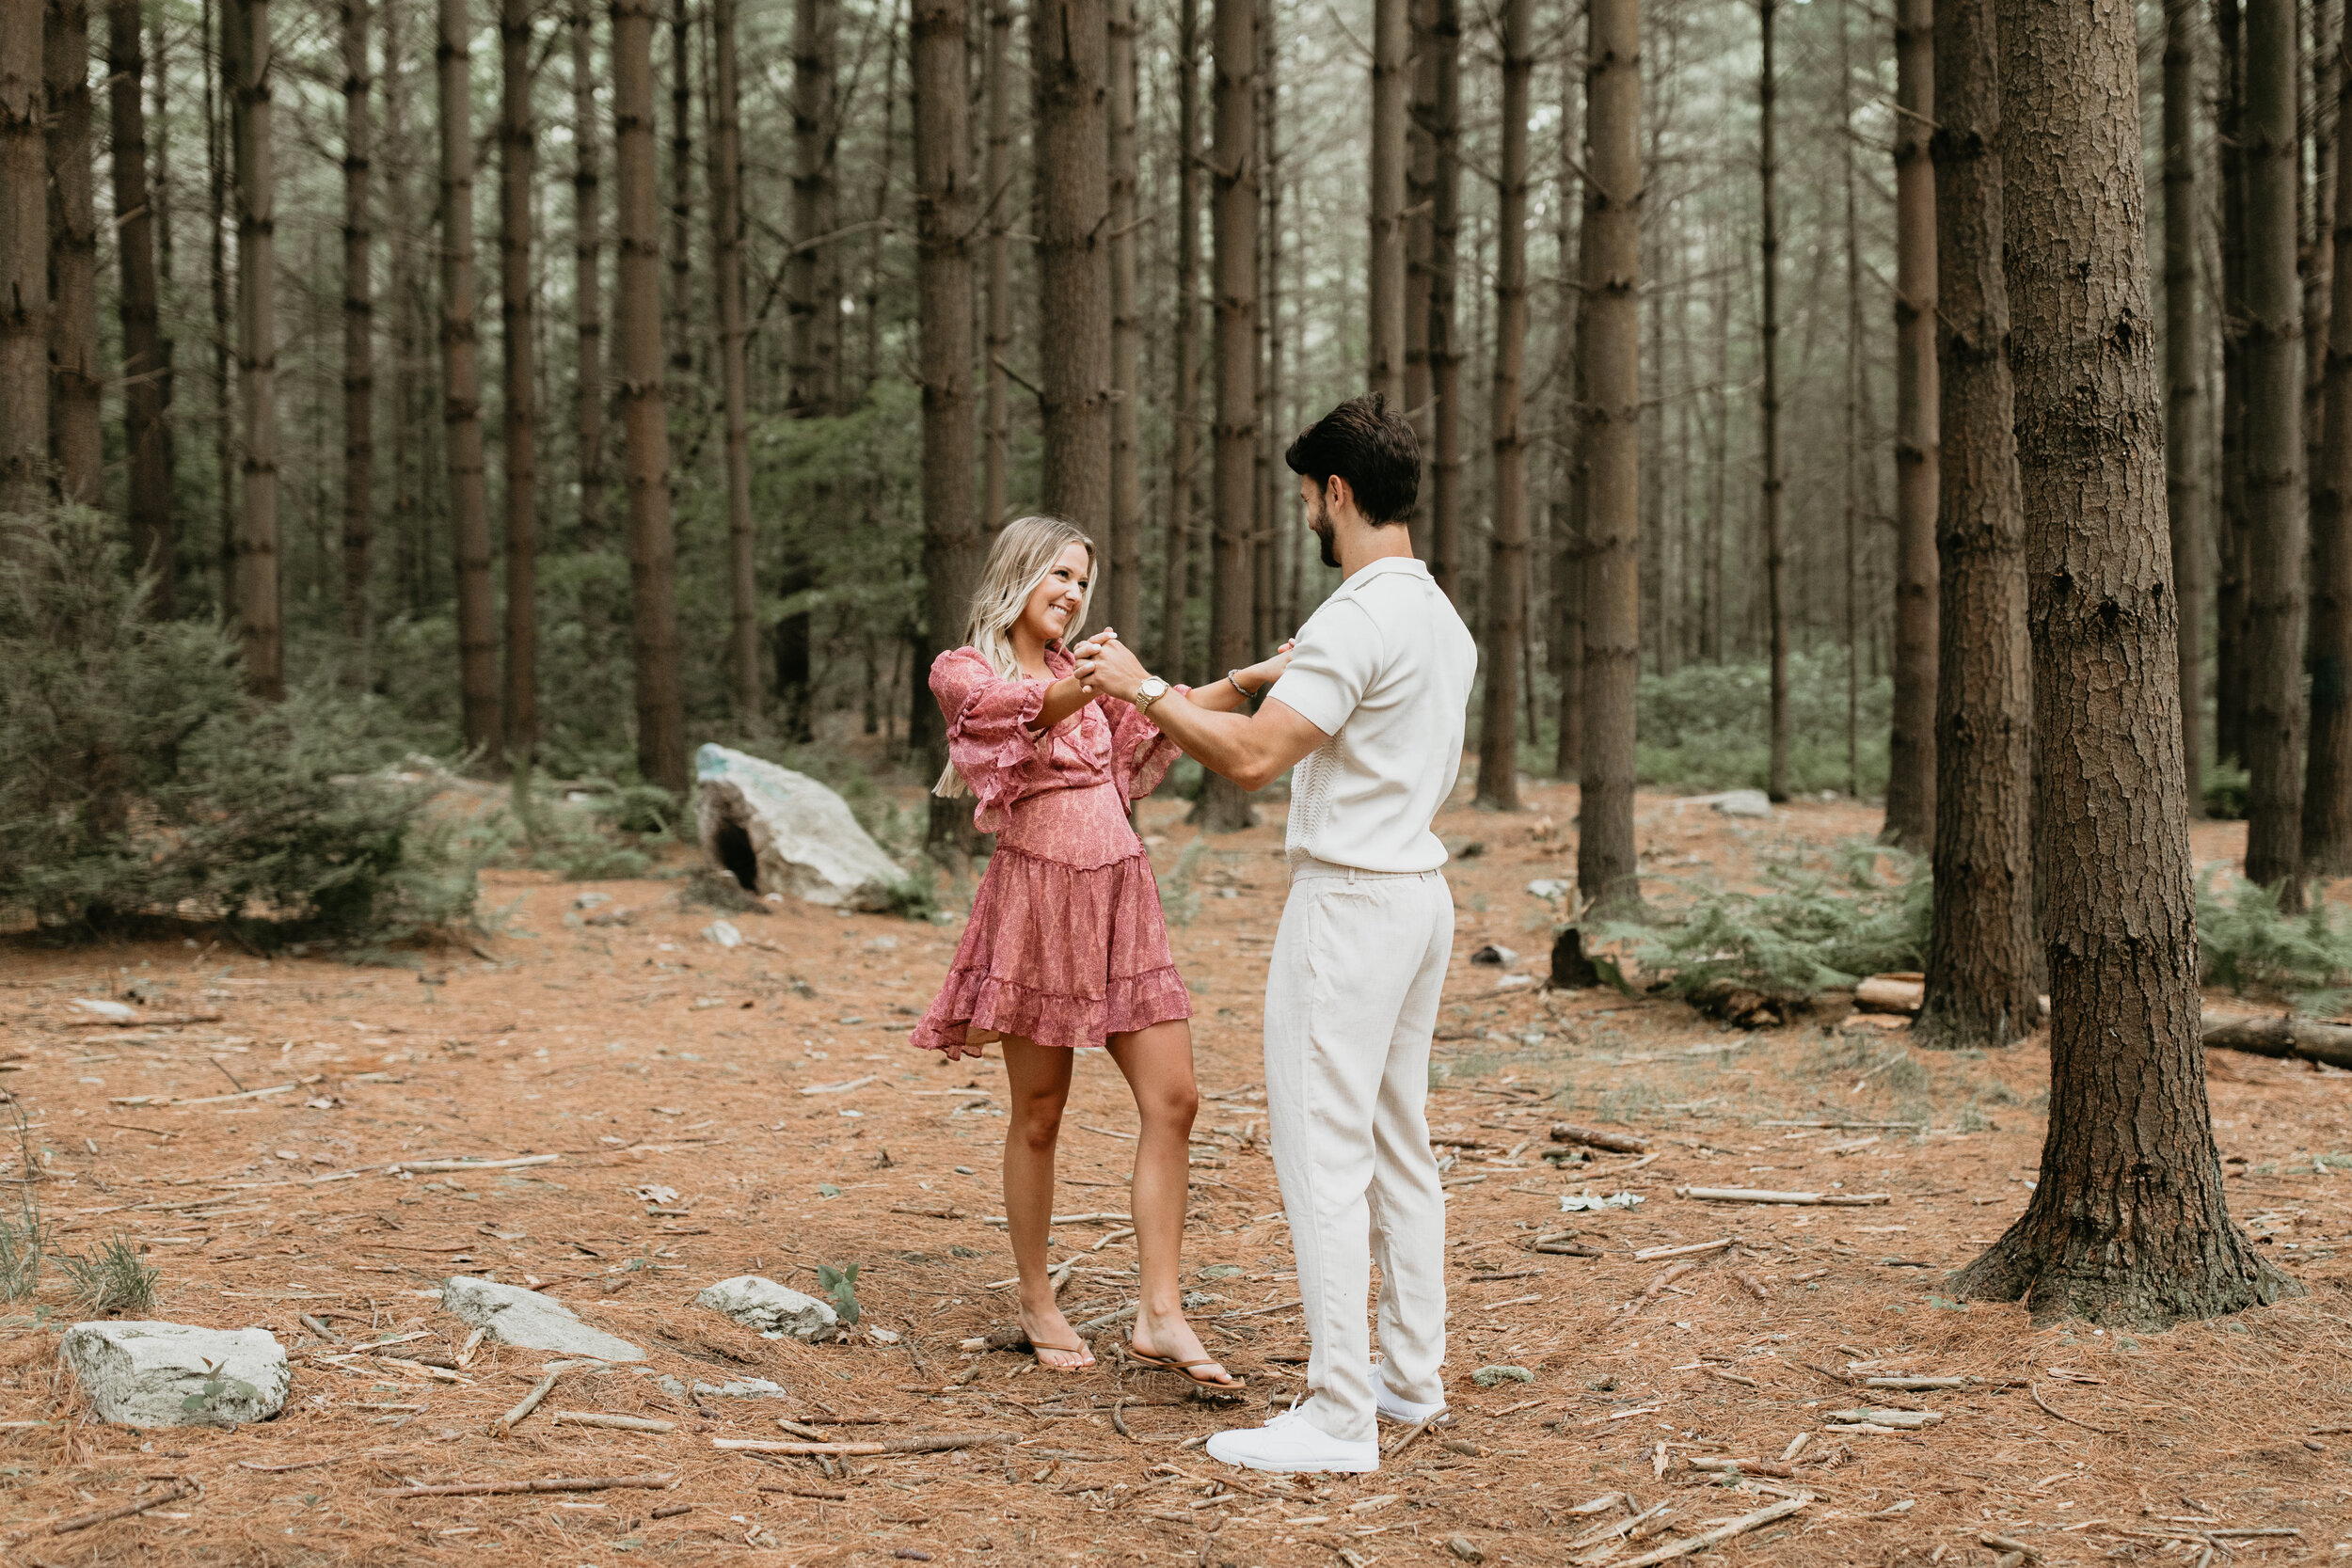 Nicole-Daacke-Photography-michaux-state-forest-elopement-adventure-engagement-session-pennsylvania-elopement-pa-elopement-photographer-gettysburg-photographer-state-park-elopement-engagement-session-pennsylvania-waterfall-105.jpg